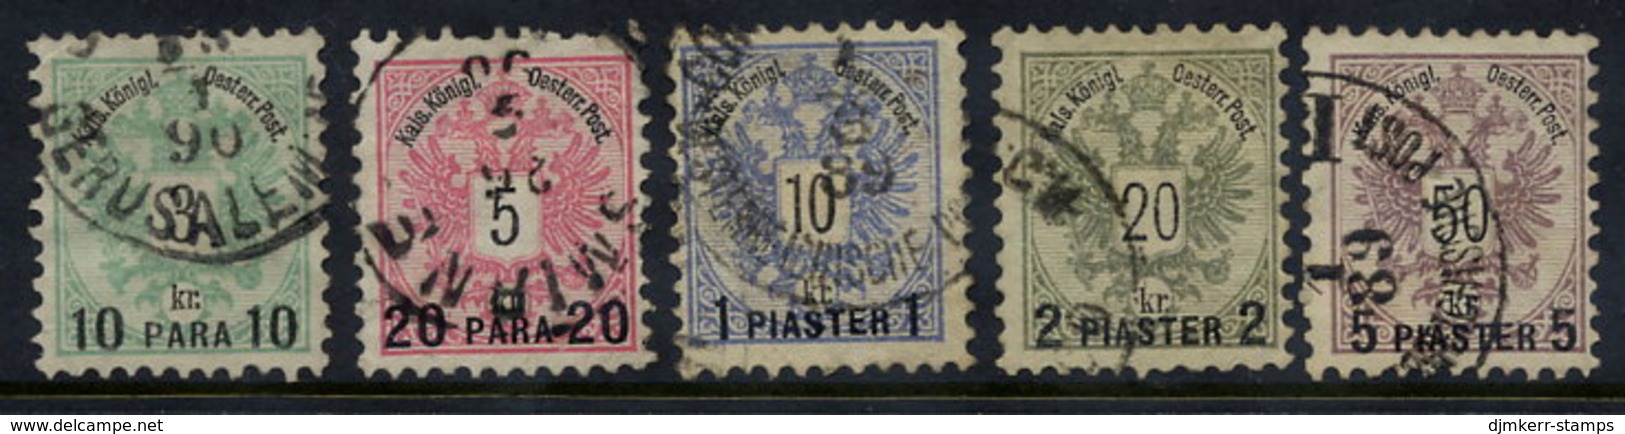 AUSTRIA PO In The LEVANT 1888 Surcharges On Arms Issue Used.  Michel 15-19 - Eastern Austria